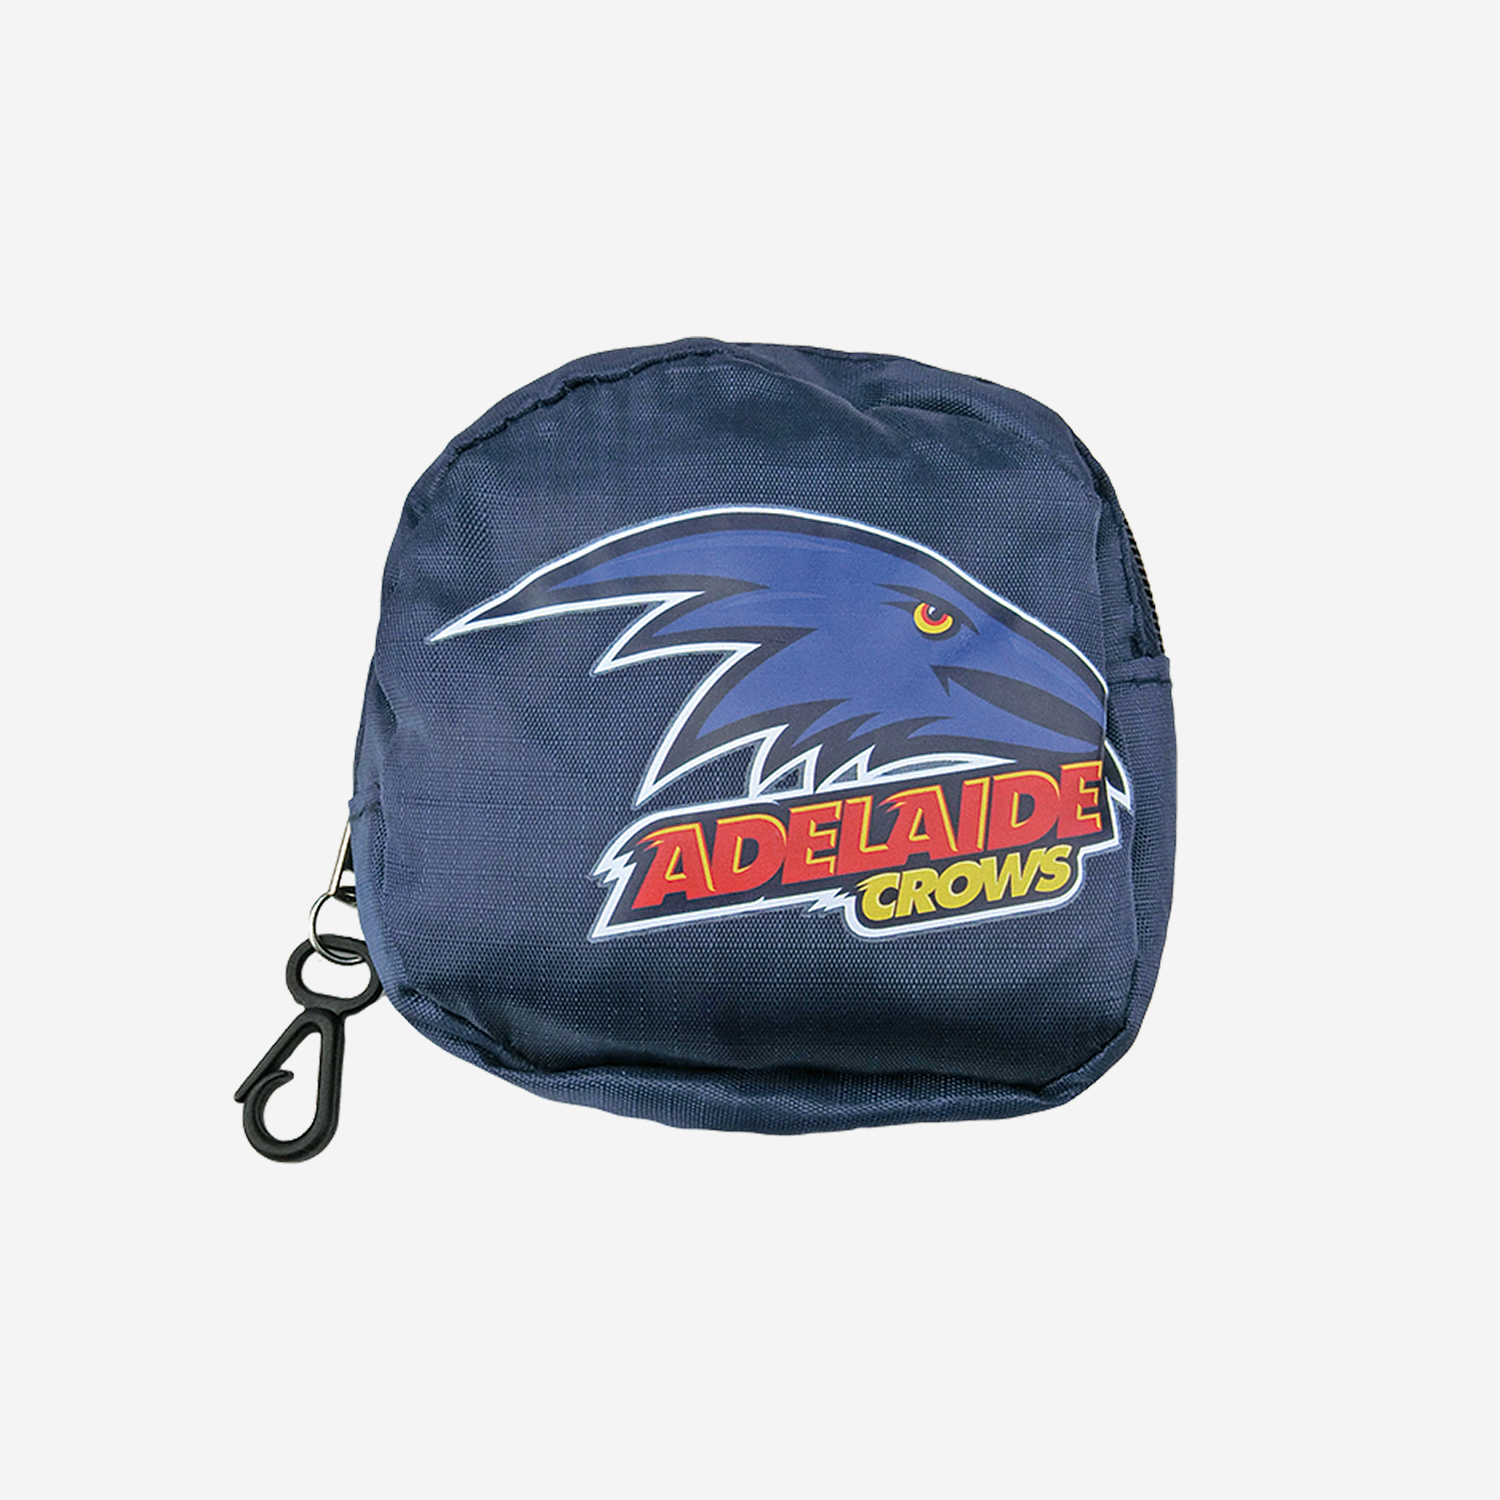 ADELAIDE CROWS AFL FOLDABLE TOTE BAG